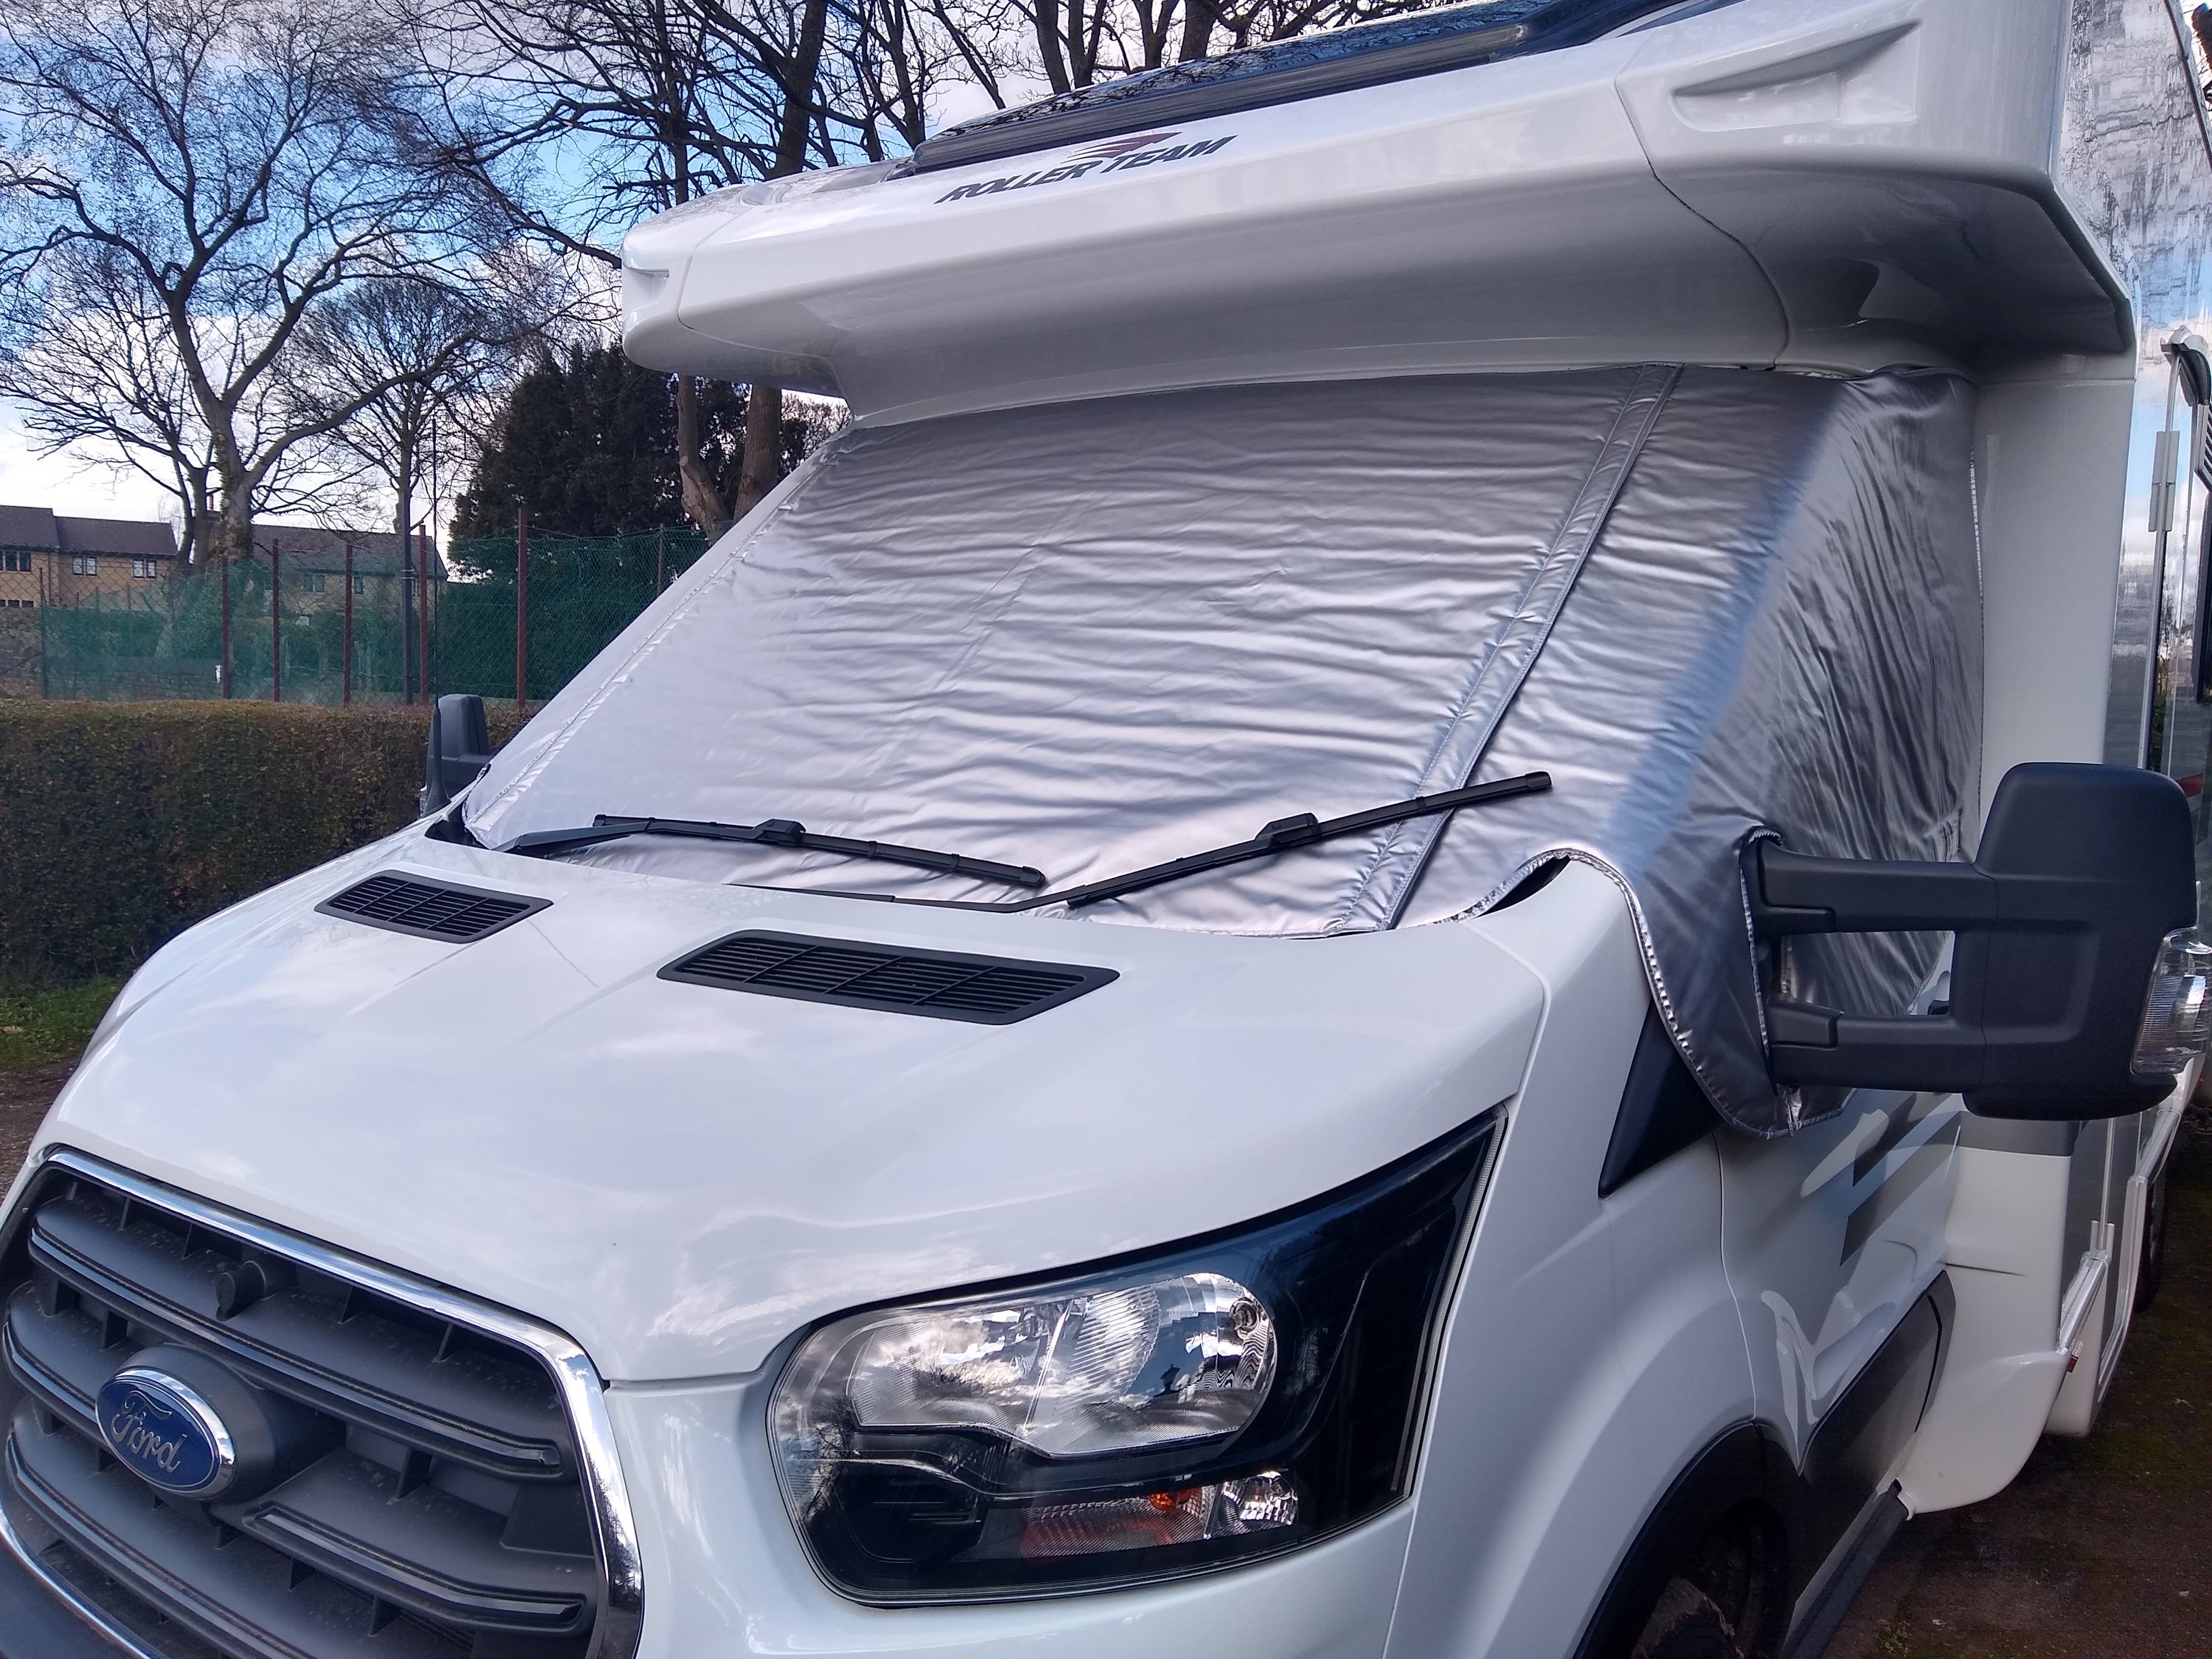 External Thermal Screen Cab Cover Windscreen Blinds Ford Tourneo